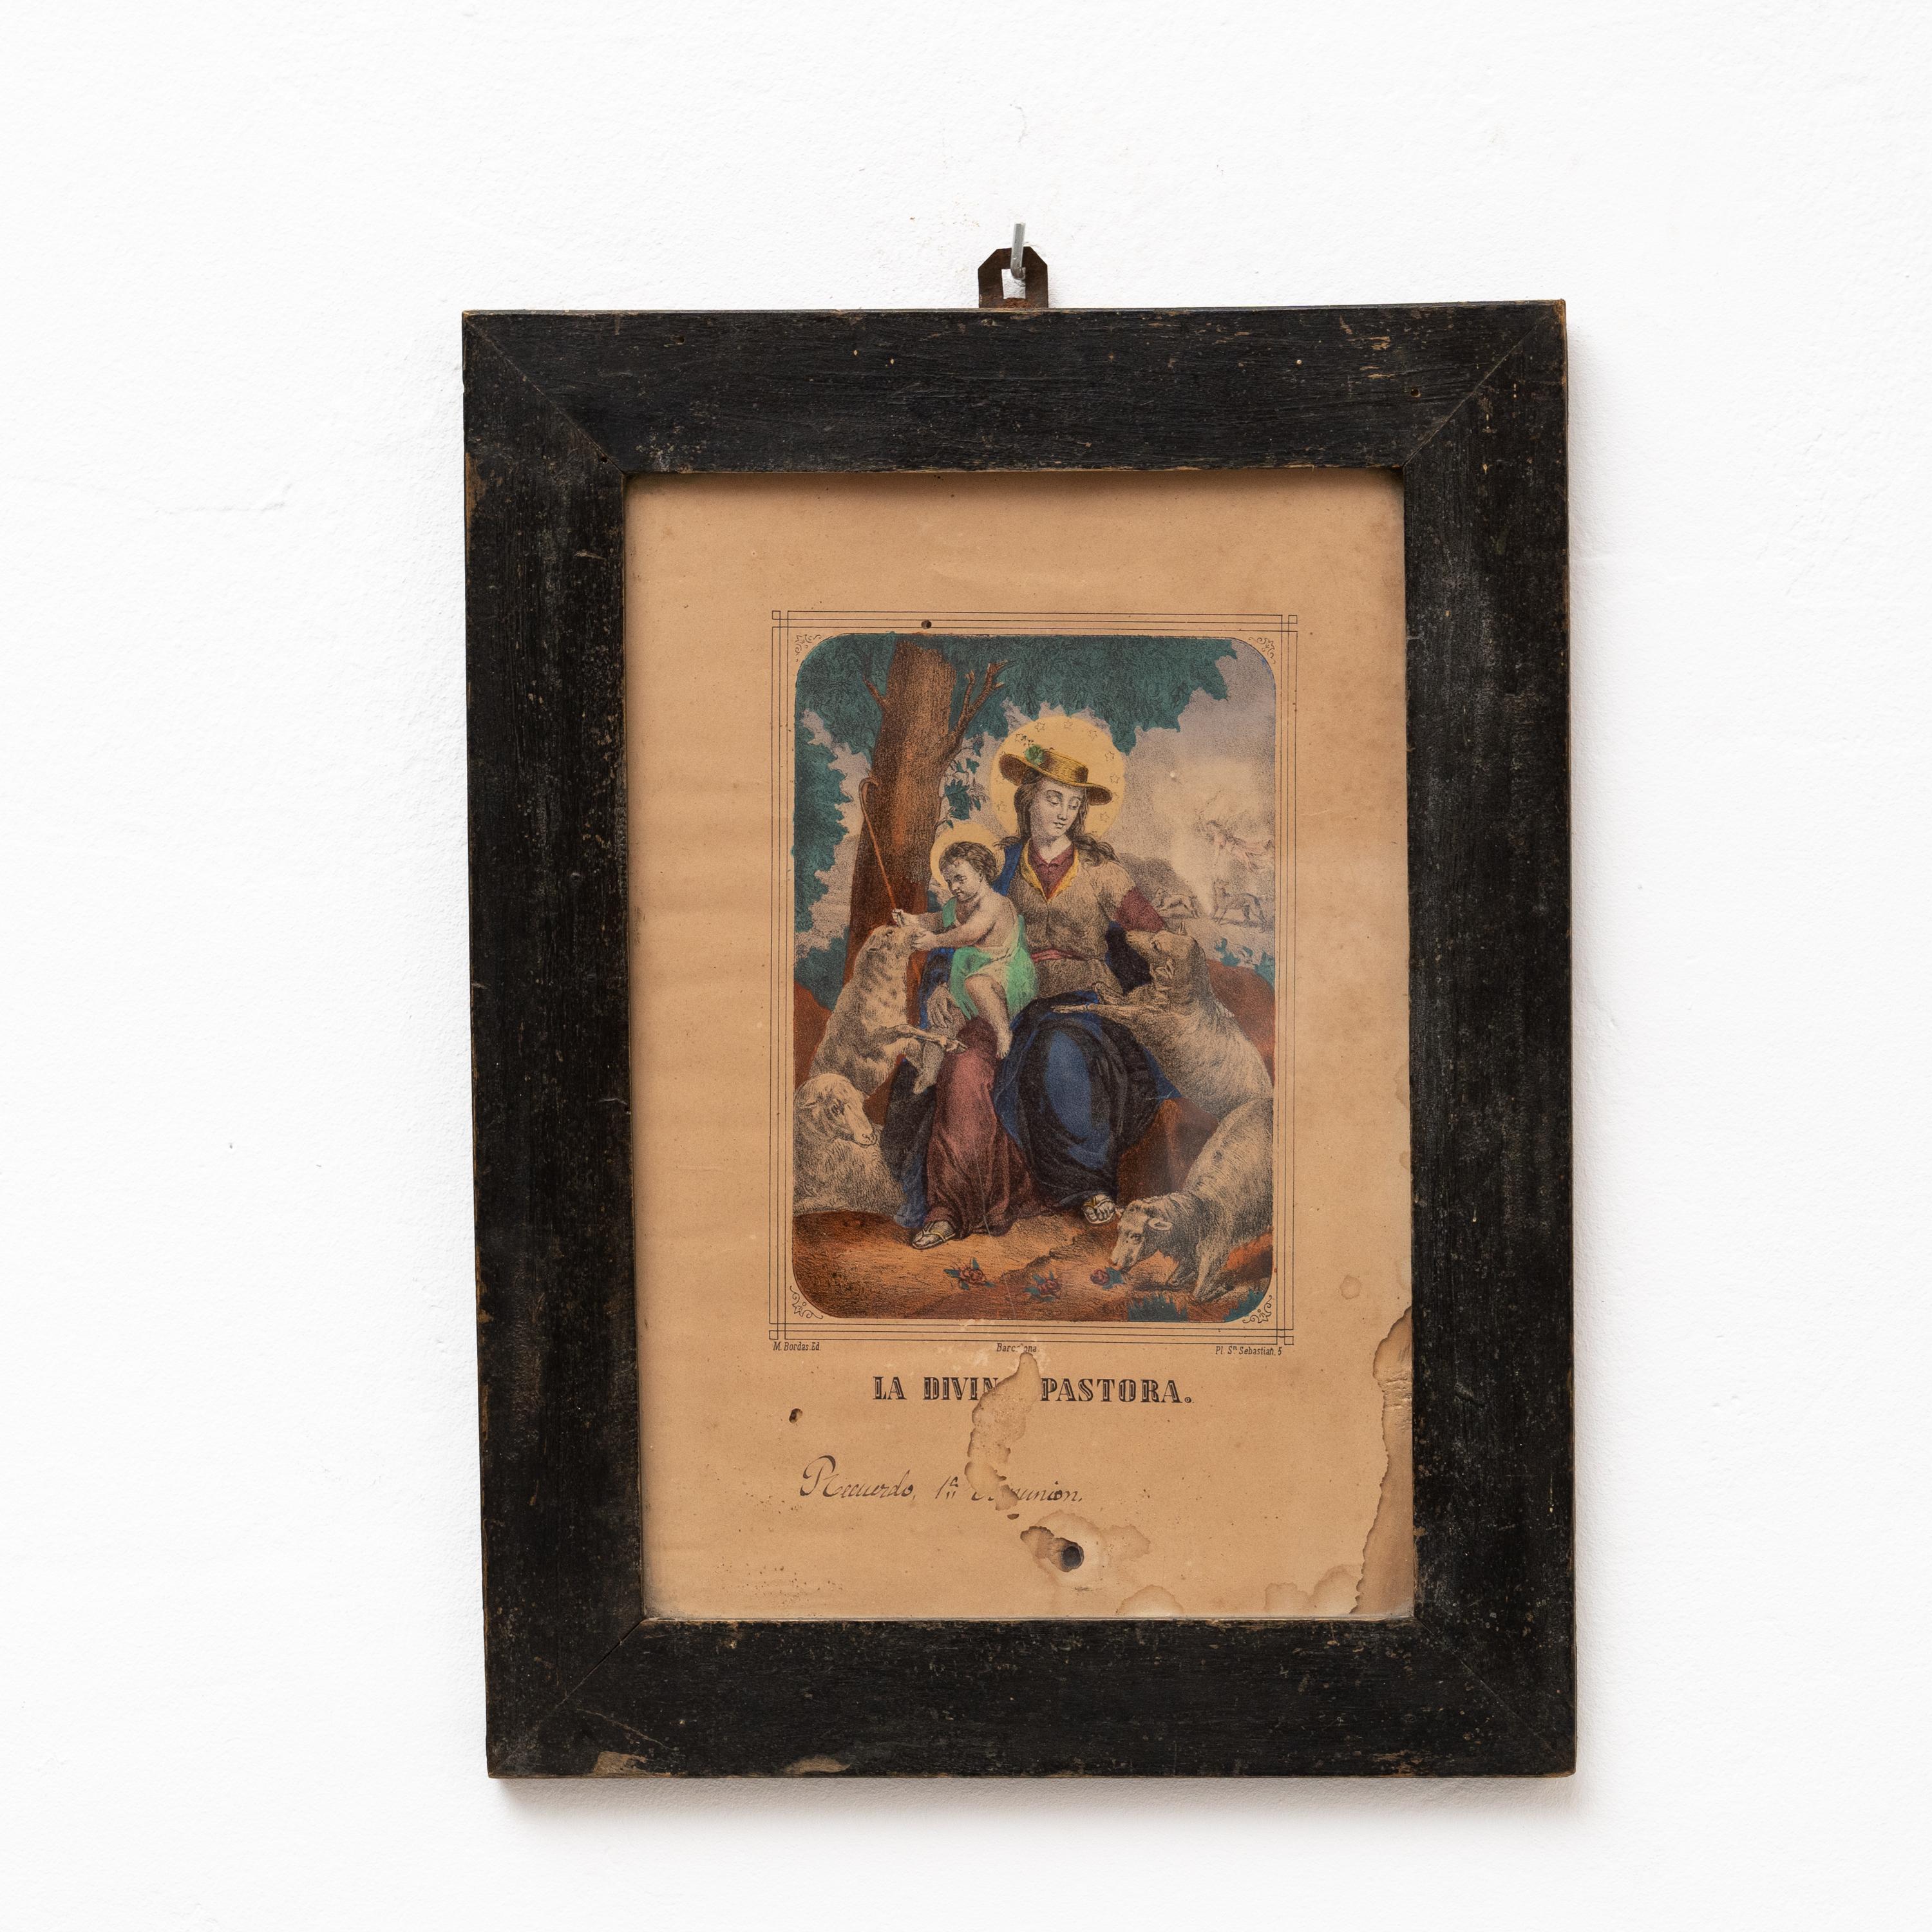 Framed Print of Divina Pastora.

By unknown artist, circa 1940.

In original condition, with some visible signs of previous use and age, preserving a beautiful patina.

Materials:
Paper
Wood.